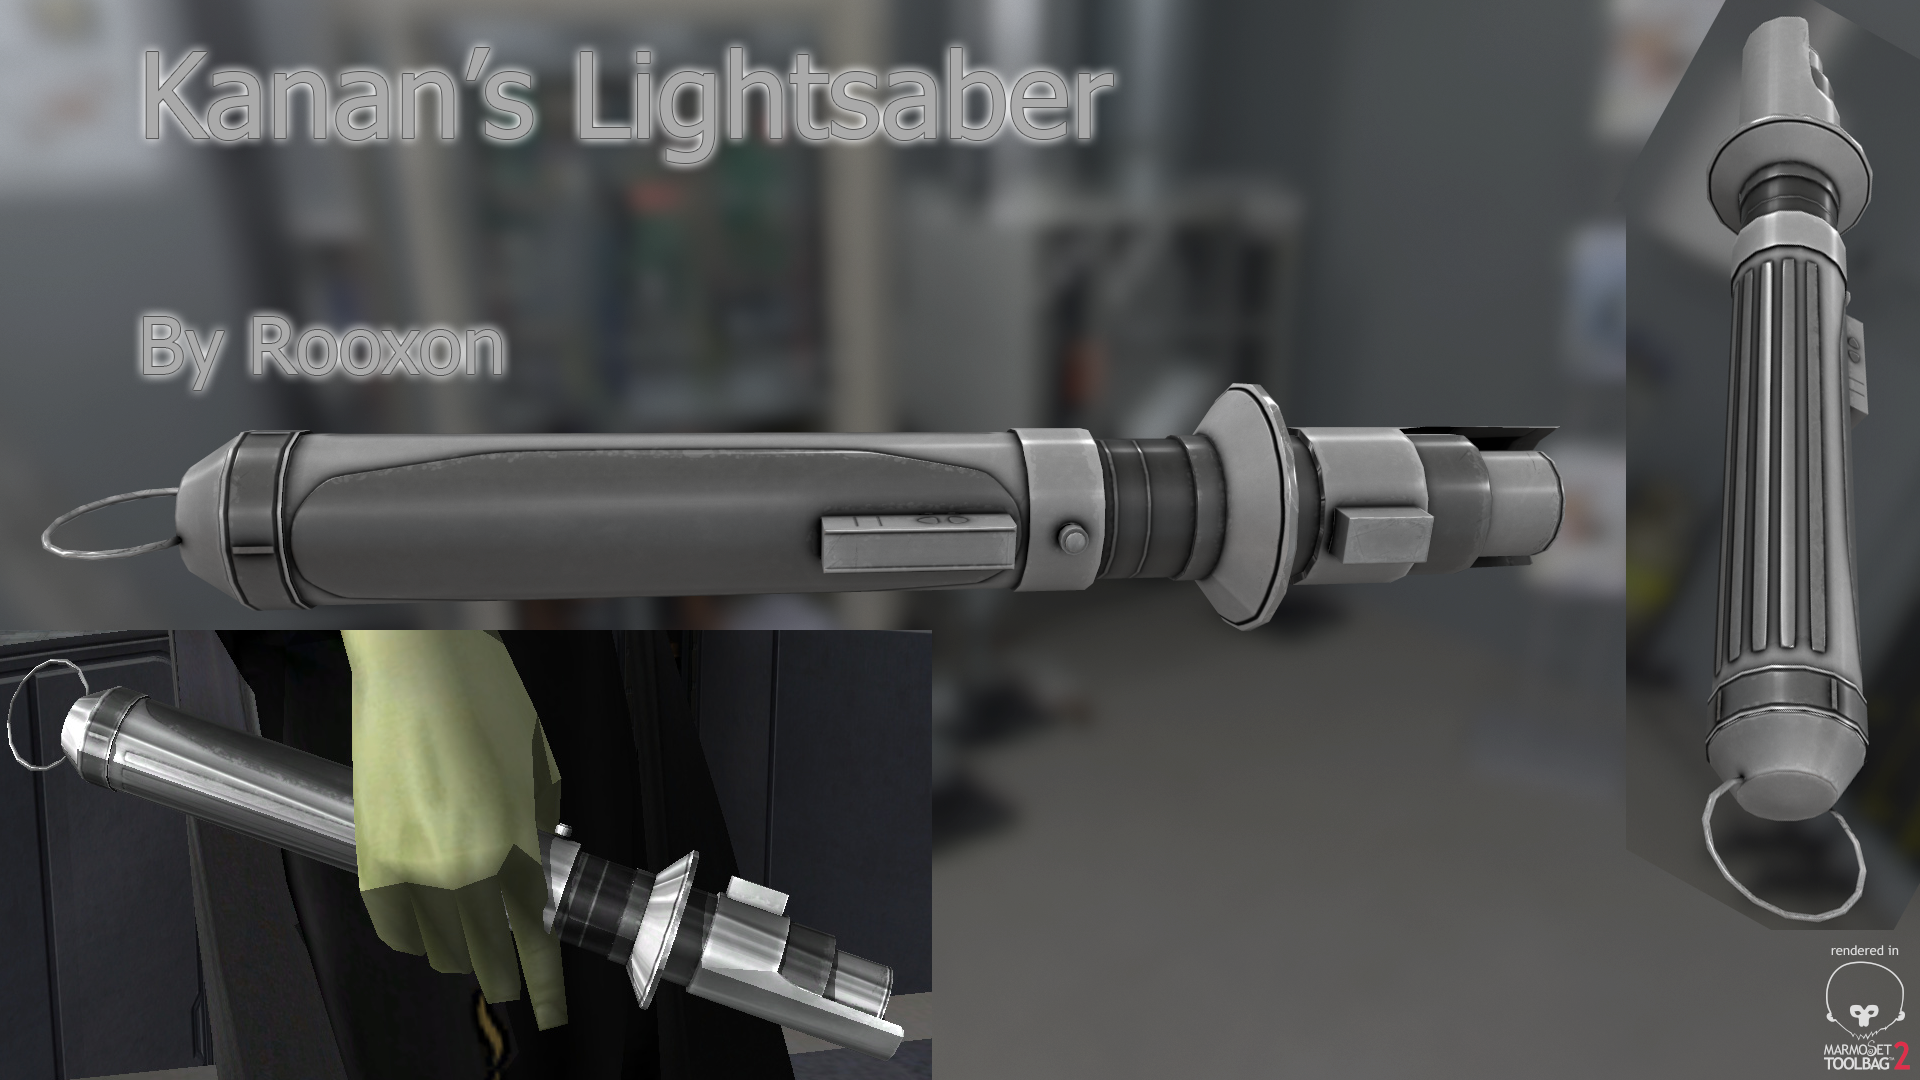 More information about "Kanan's Lightsaber"